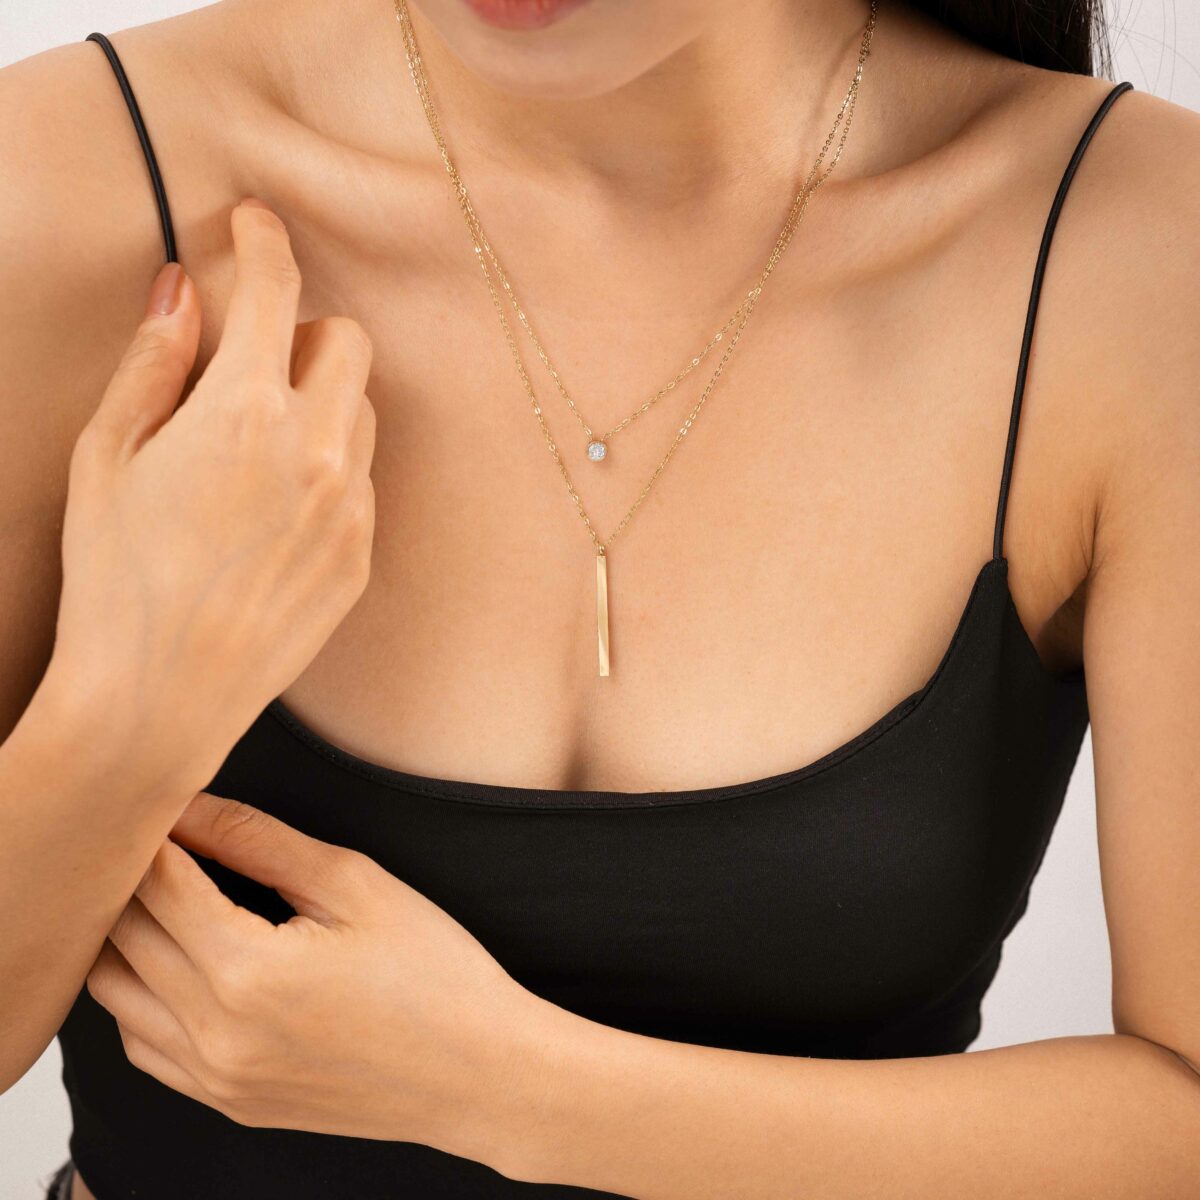 https://m.clubbella.co/product/solitaire-bar-necklace-2/ SOLITAIRE BAR NECKLACE (6)